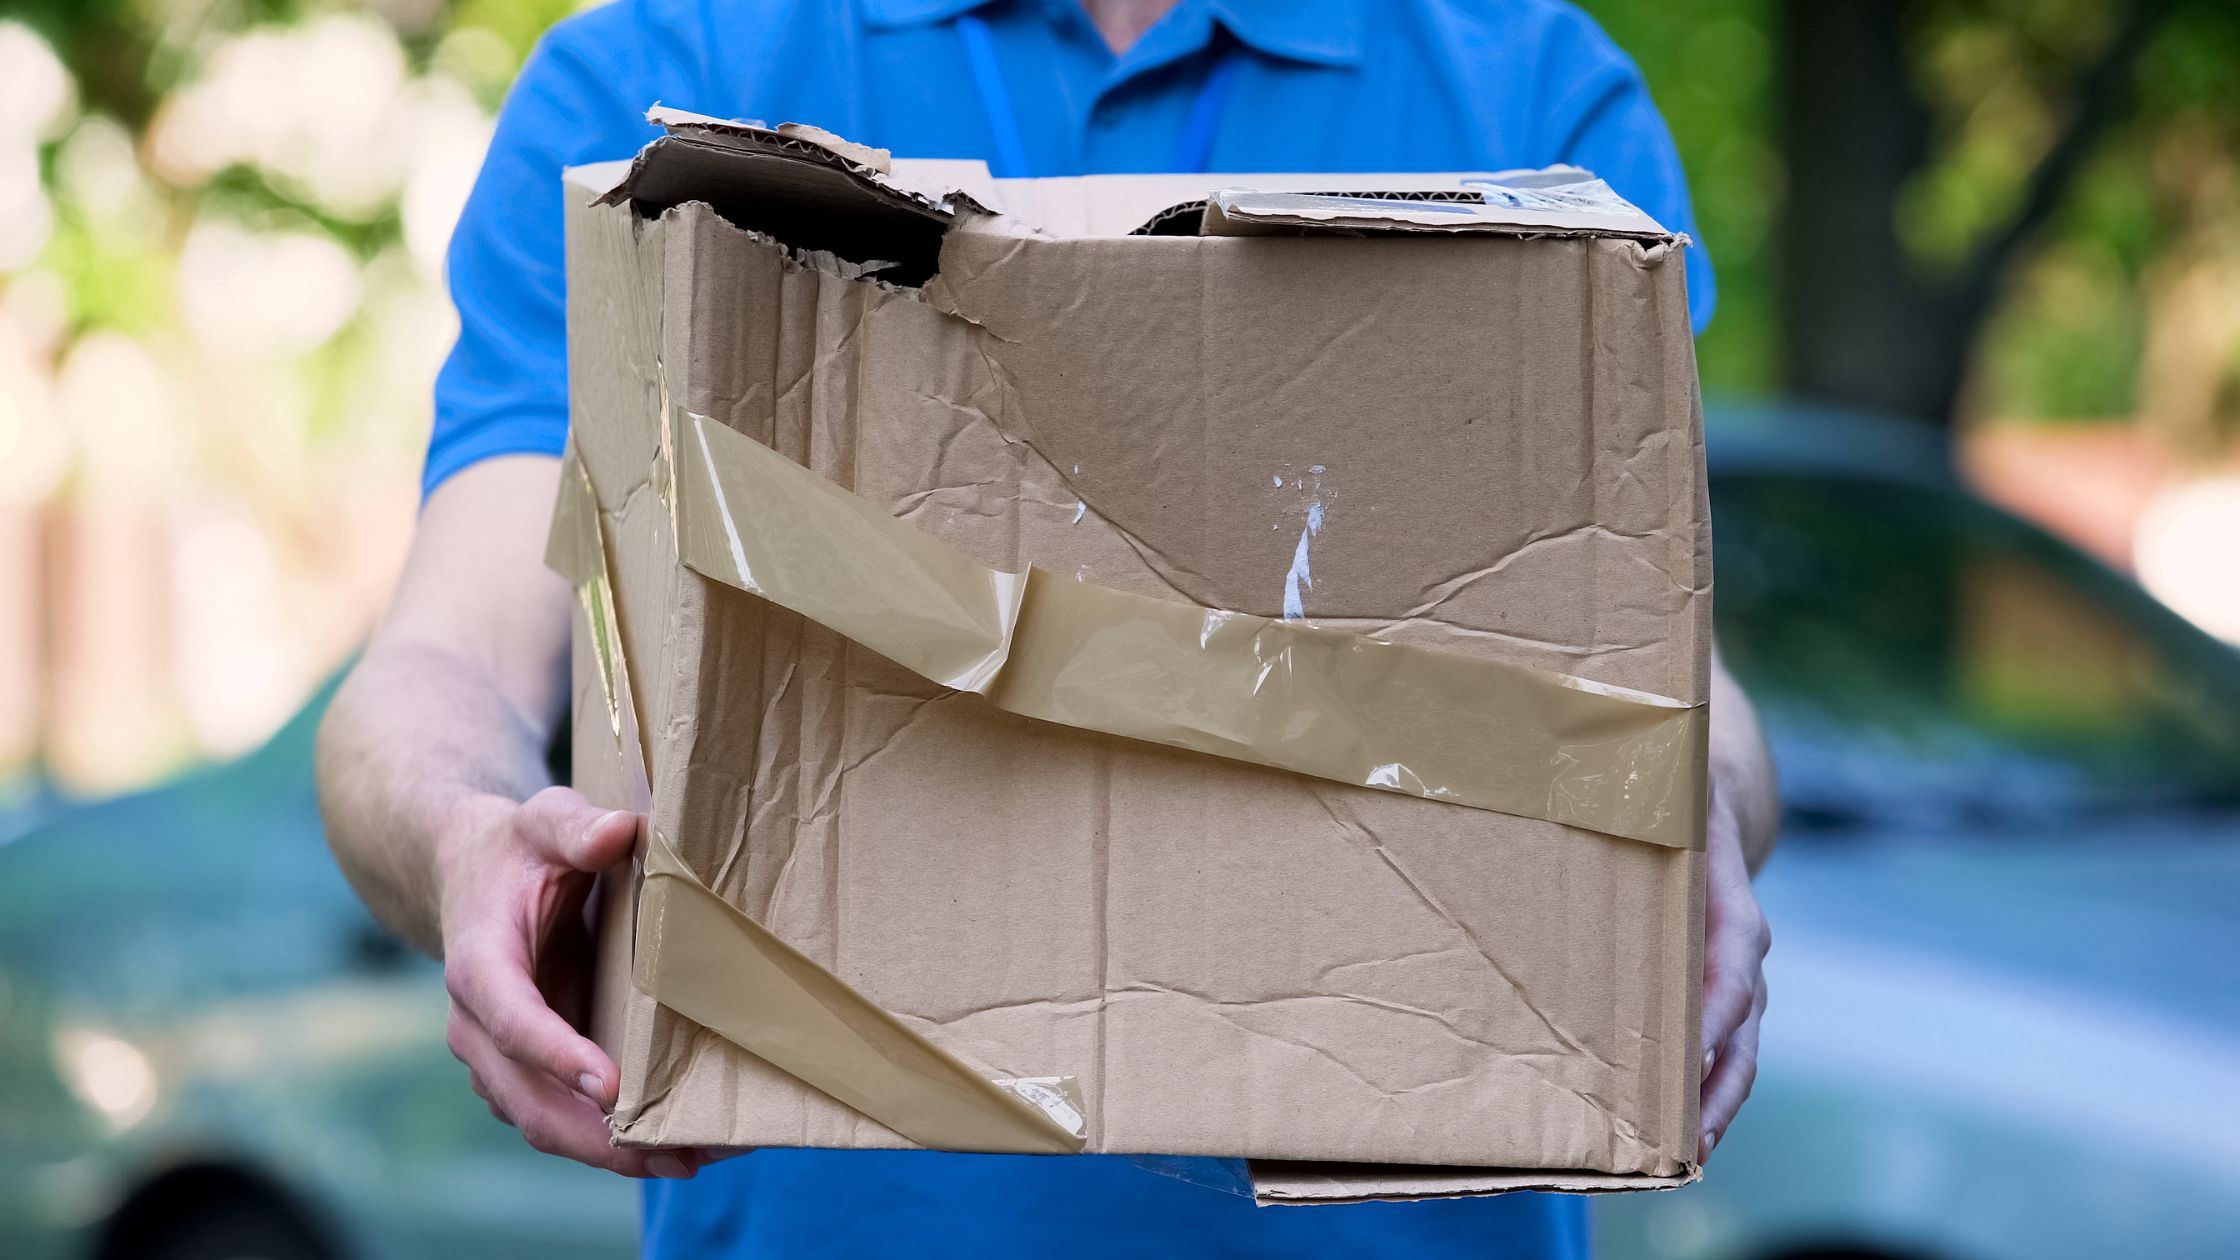 How to Prevent Packaging Damage